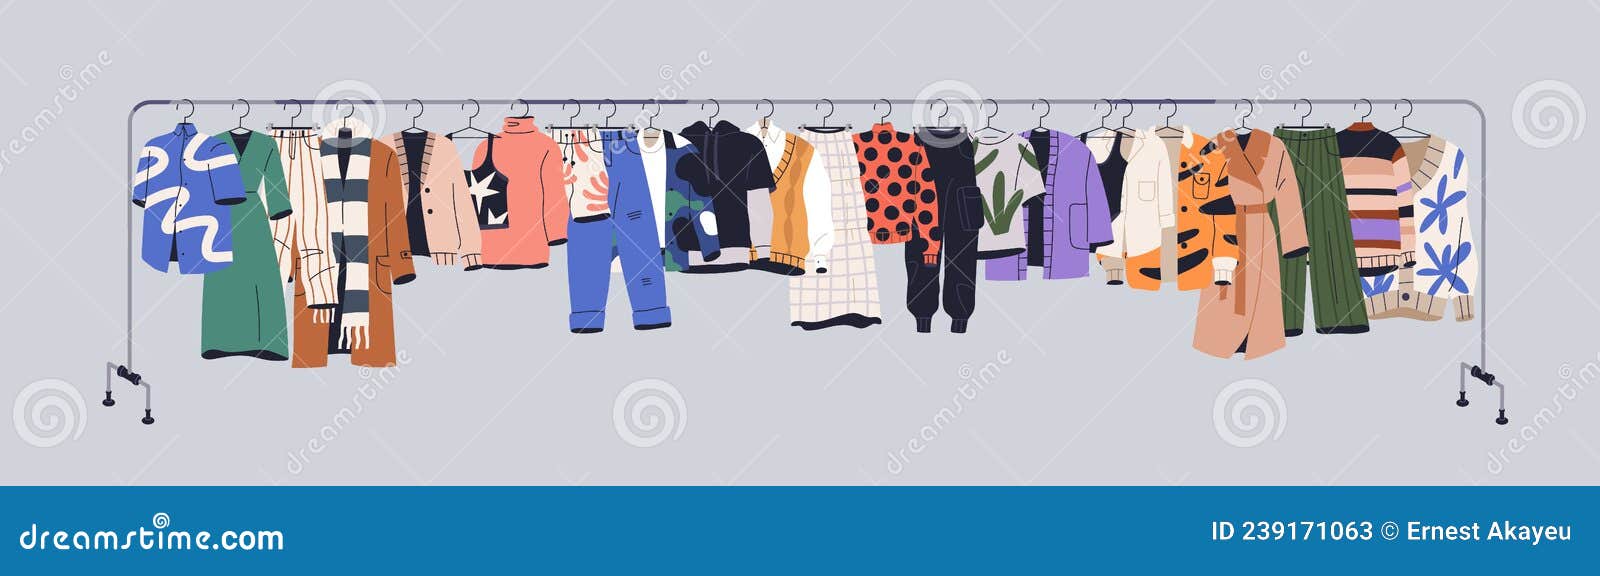 used clothes on racks, hanging on secondhand store hanger rail. garments mix on sale. apparel leftovers assortment in